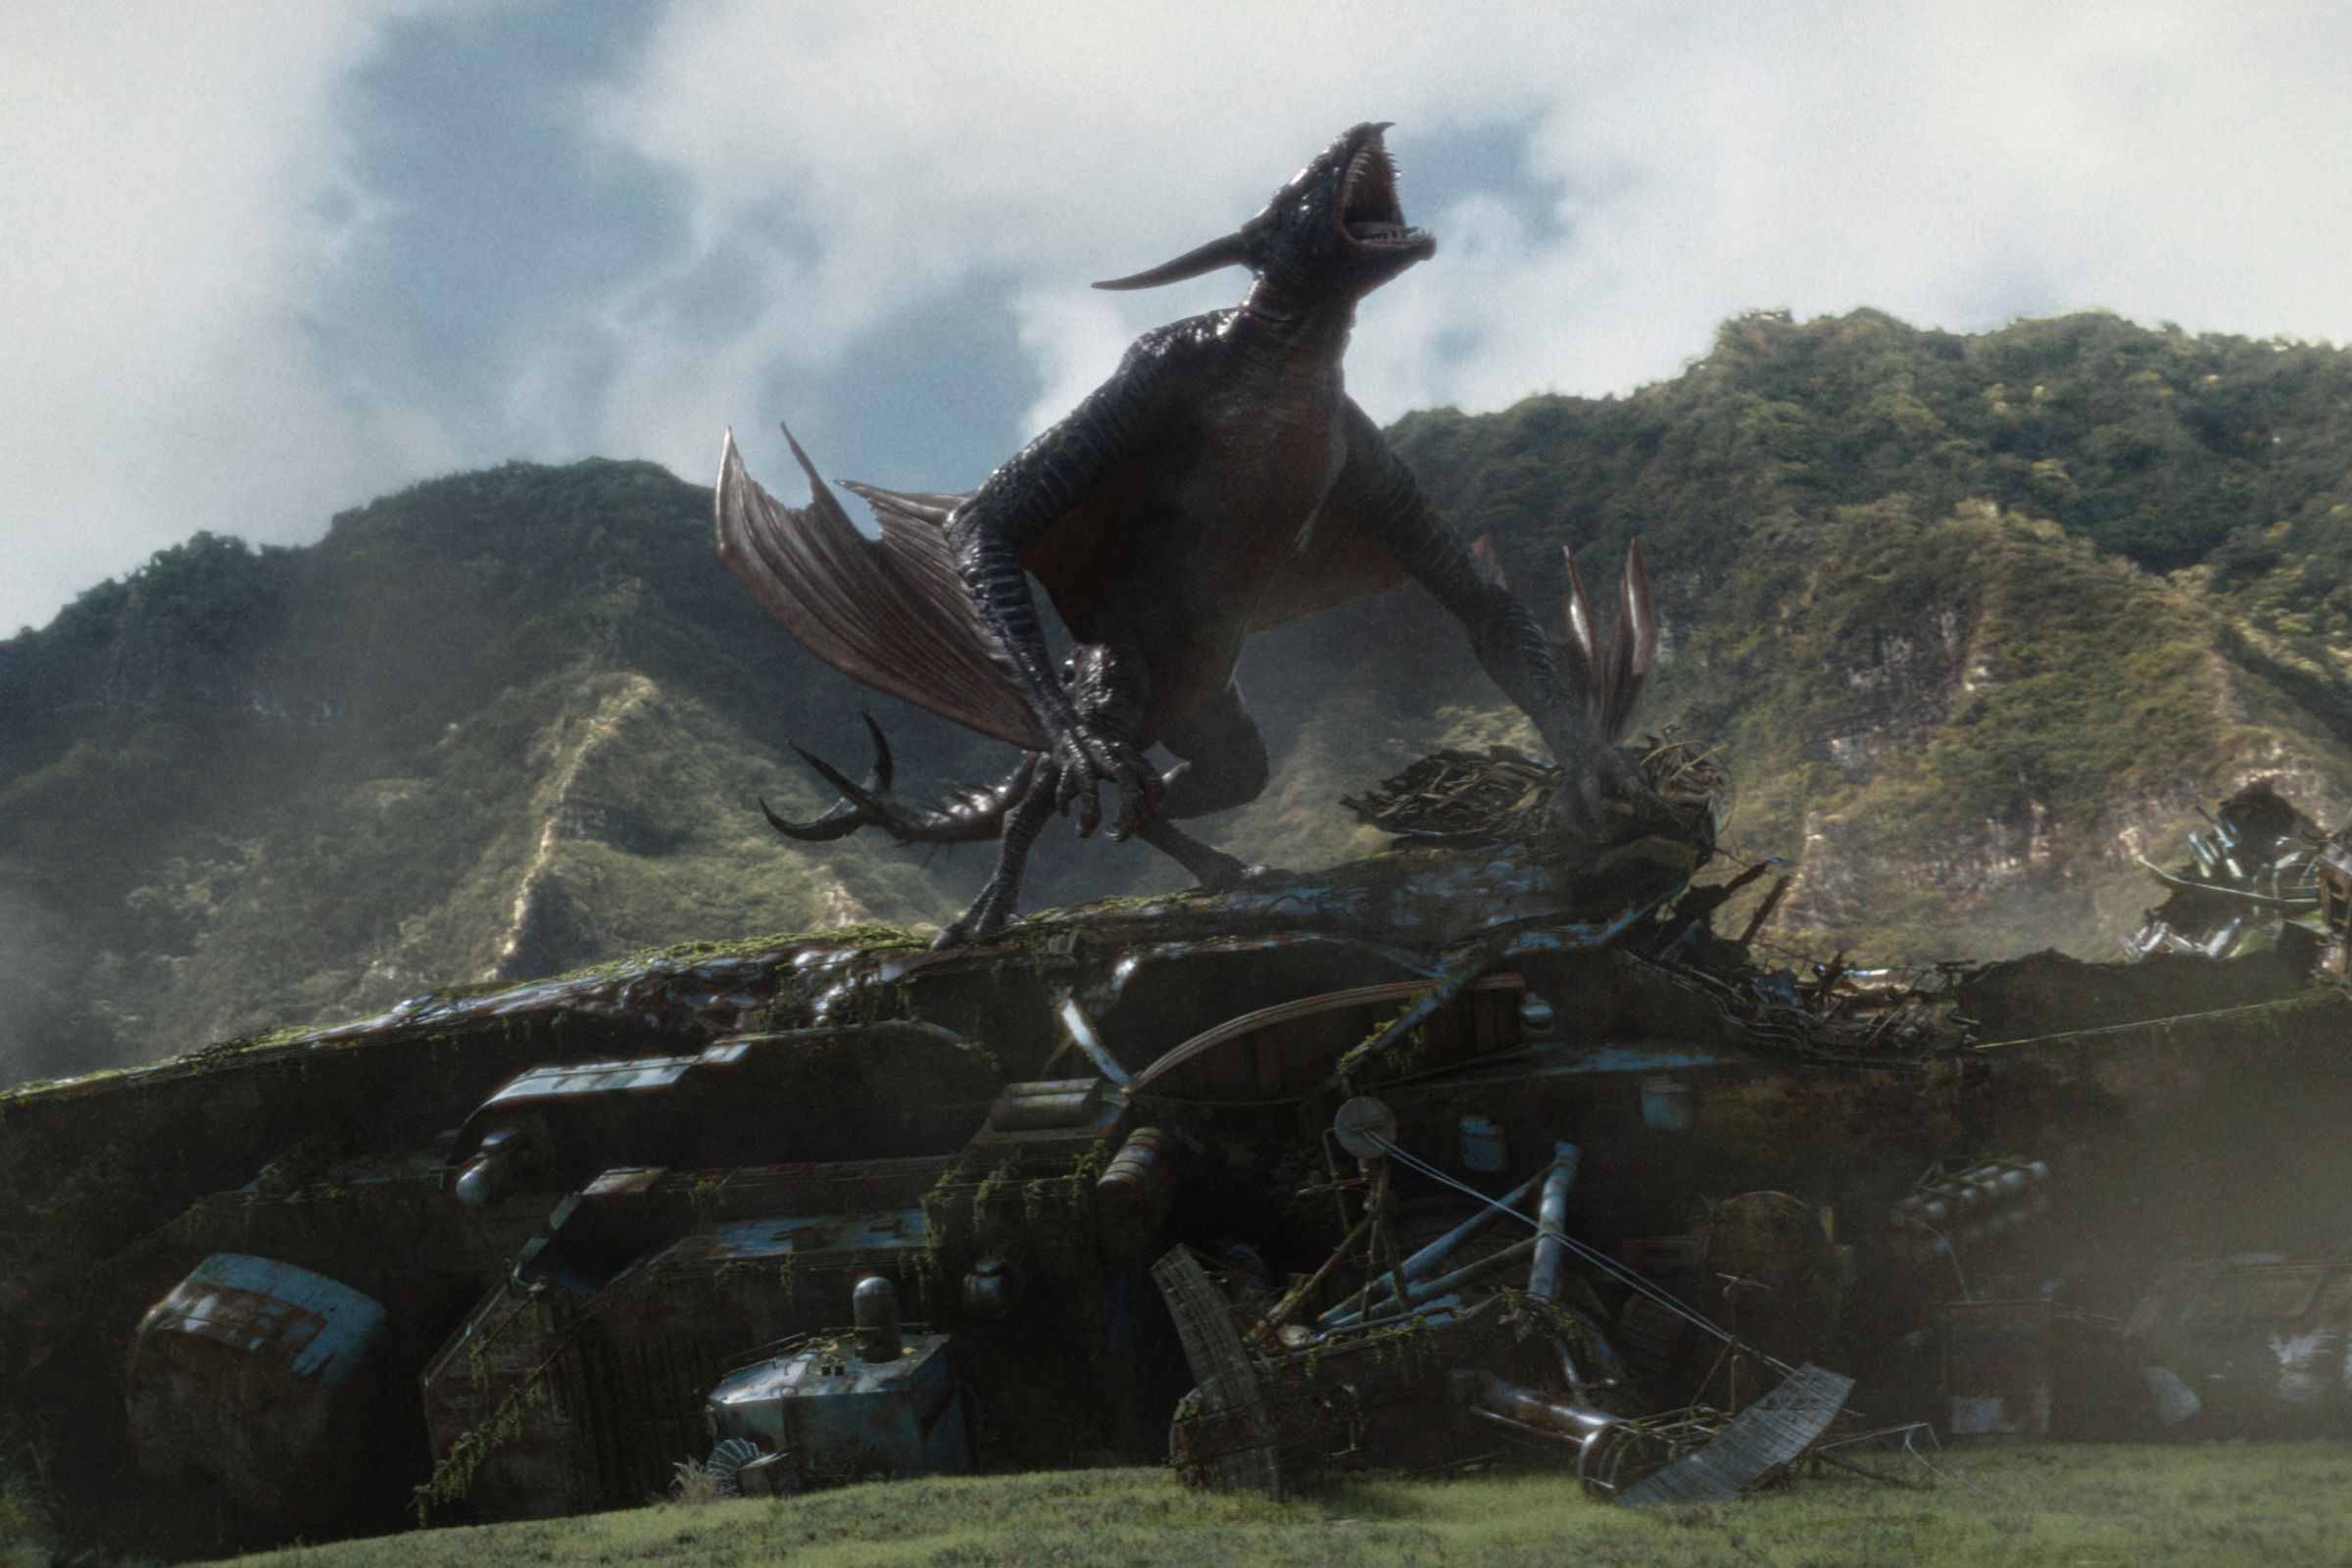 A winged dinosaur-like creature sitting atop the ruins of a wrecked building.